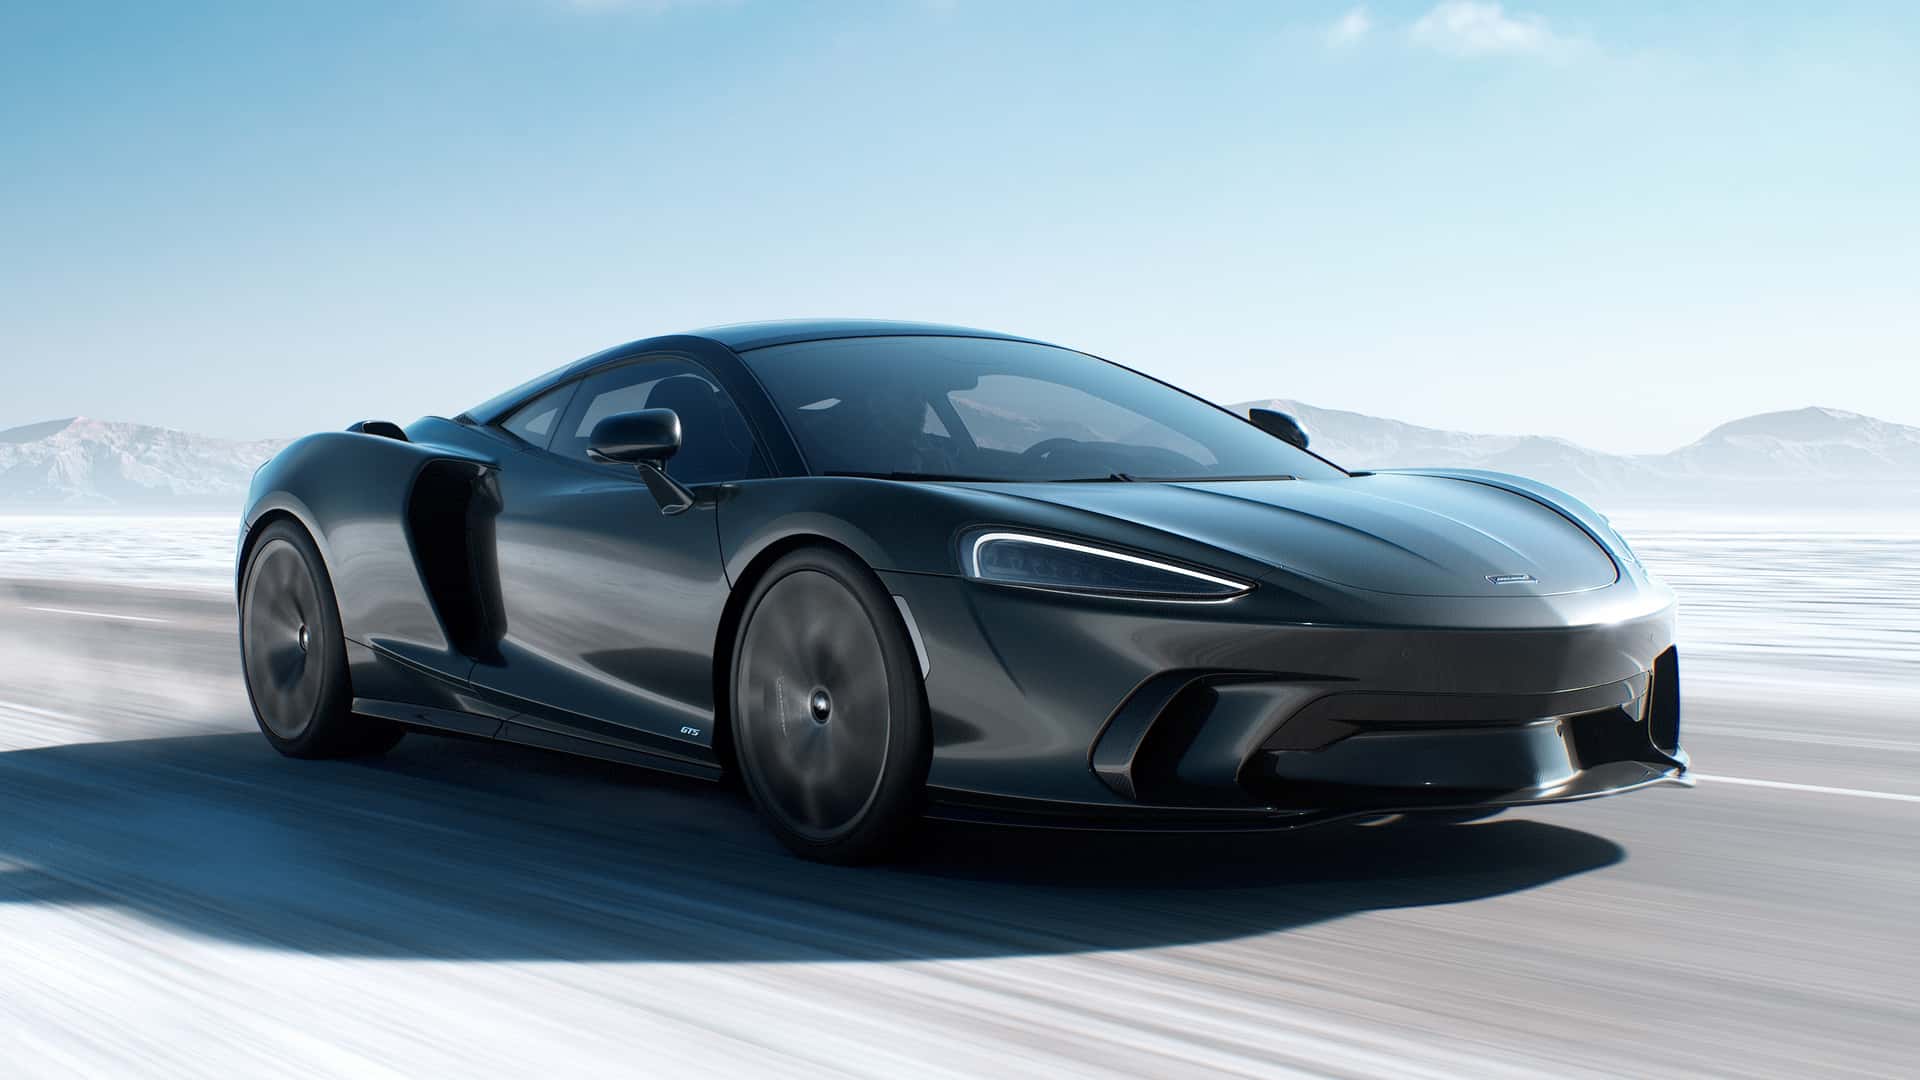 The New McLaren GTS Adds Horsepower And Loses Weight